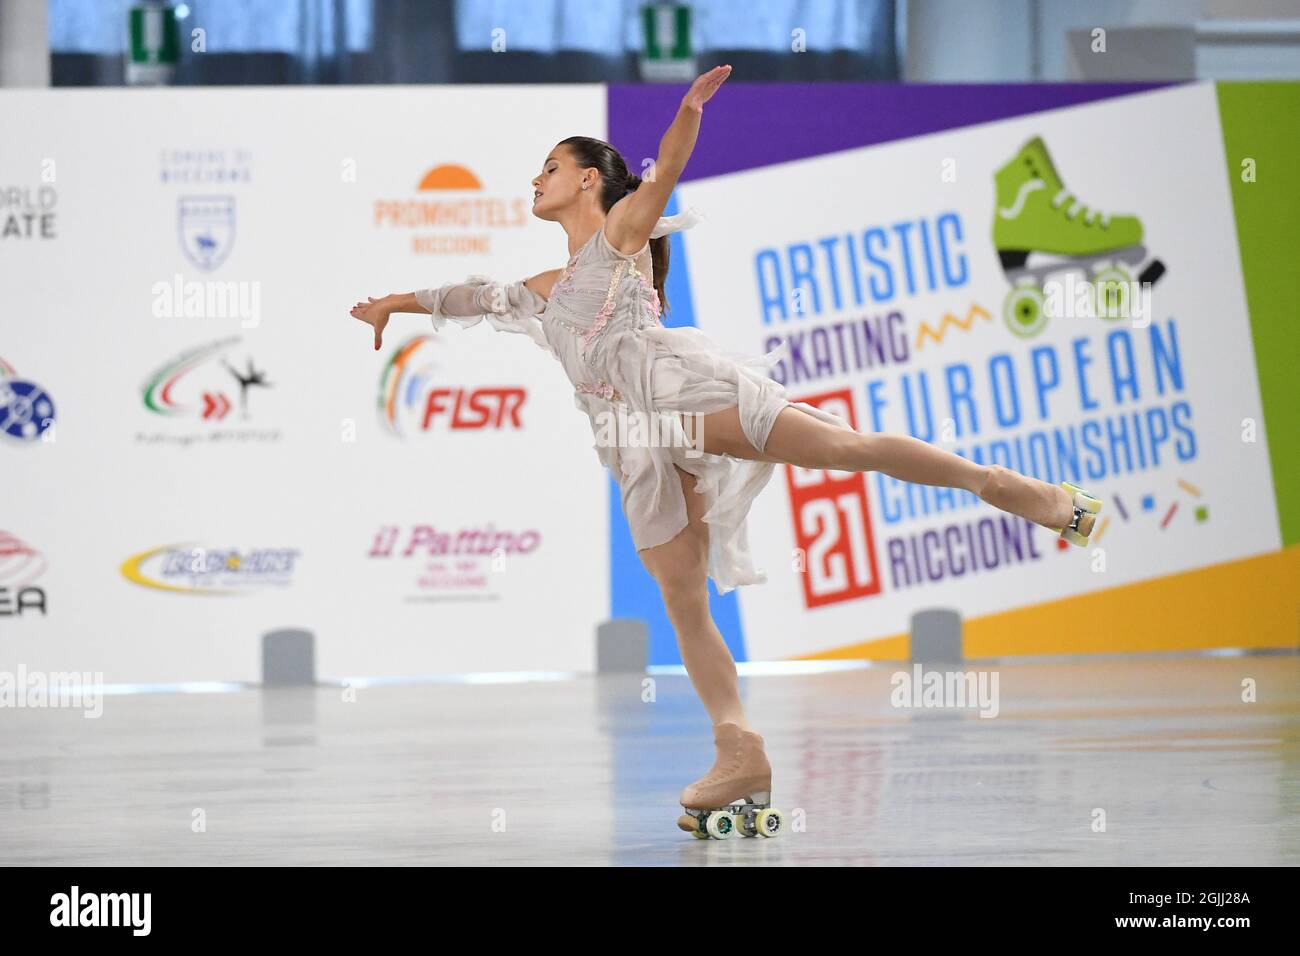 PALOMA TROIANOVSKI, France, performing in Senior Solo Dance - Free Dance at  The European Artistic Roller Skating Championships 2021 at Play Hall, on  September 07, 2021 in Riccione, Italy. Credit: Raniero  Corbelletti/AFLO/Alamy